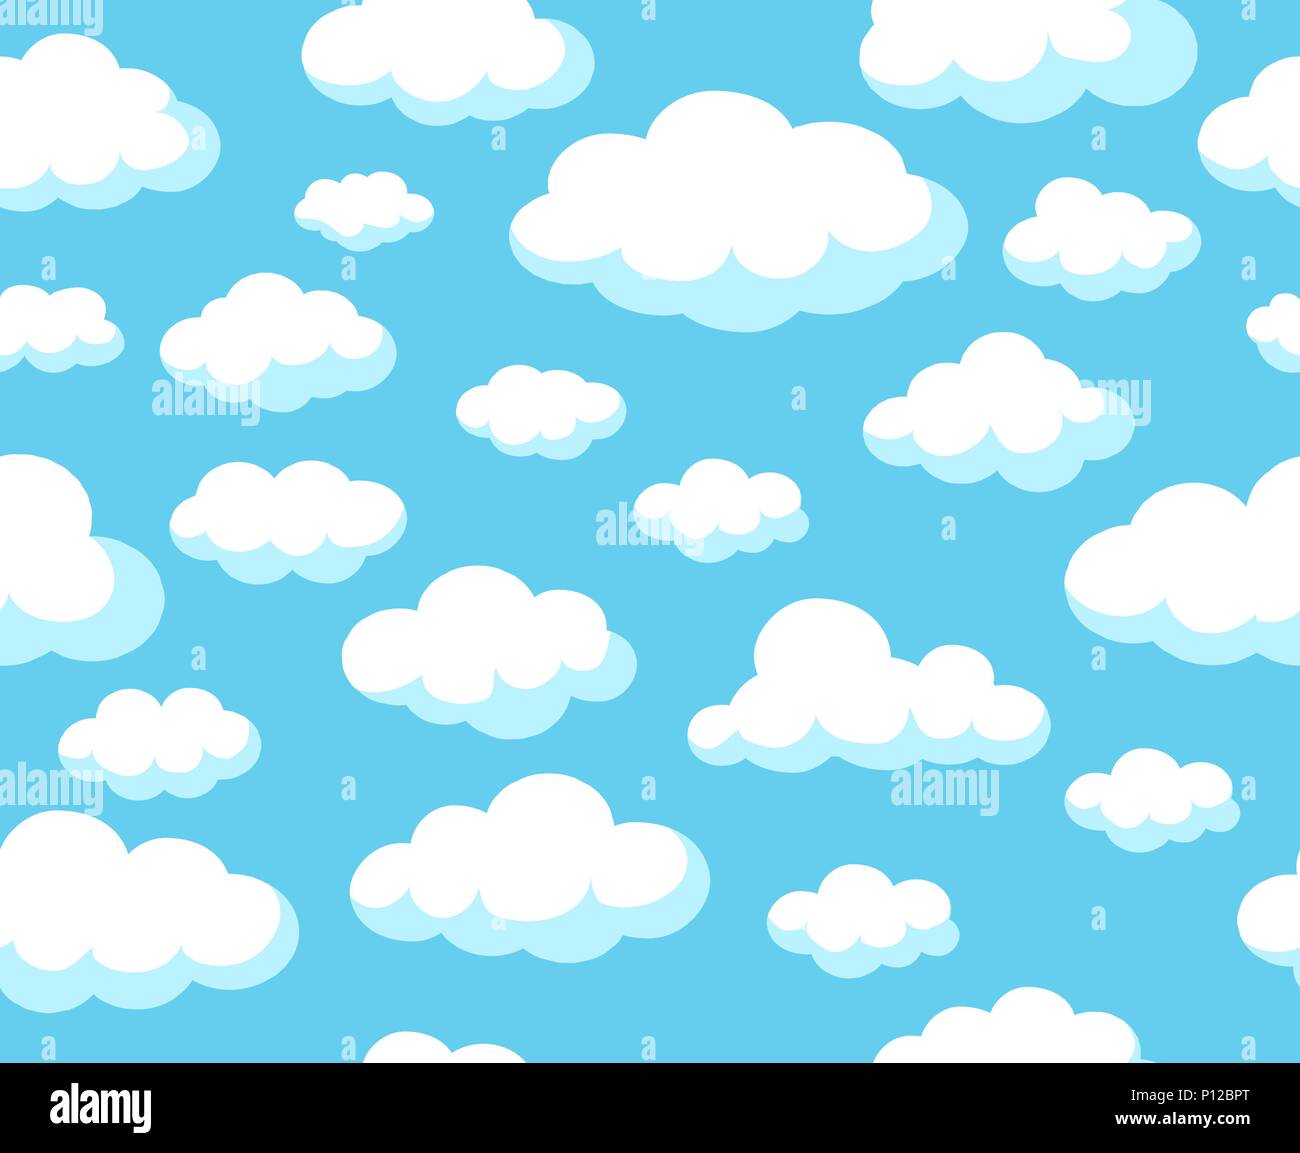 Cartoon sky pattern blue skyline vector seamless background with white nubes clouds for spring decoration wallpapers stock vector image art